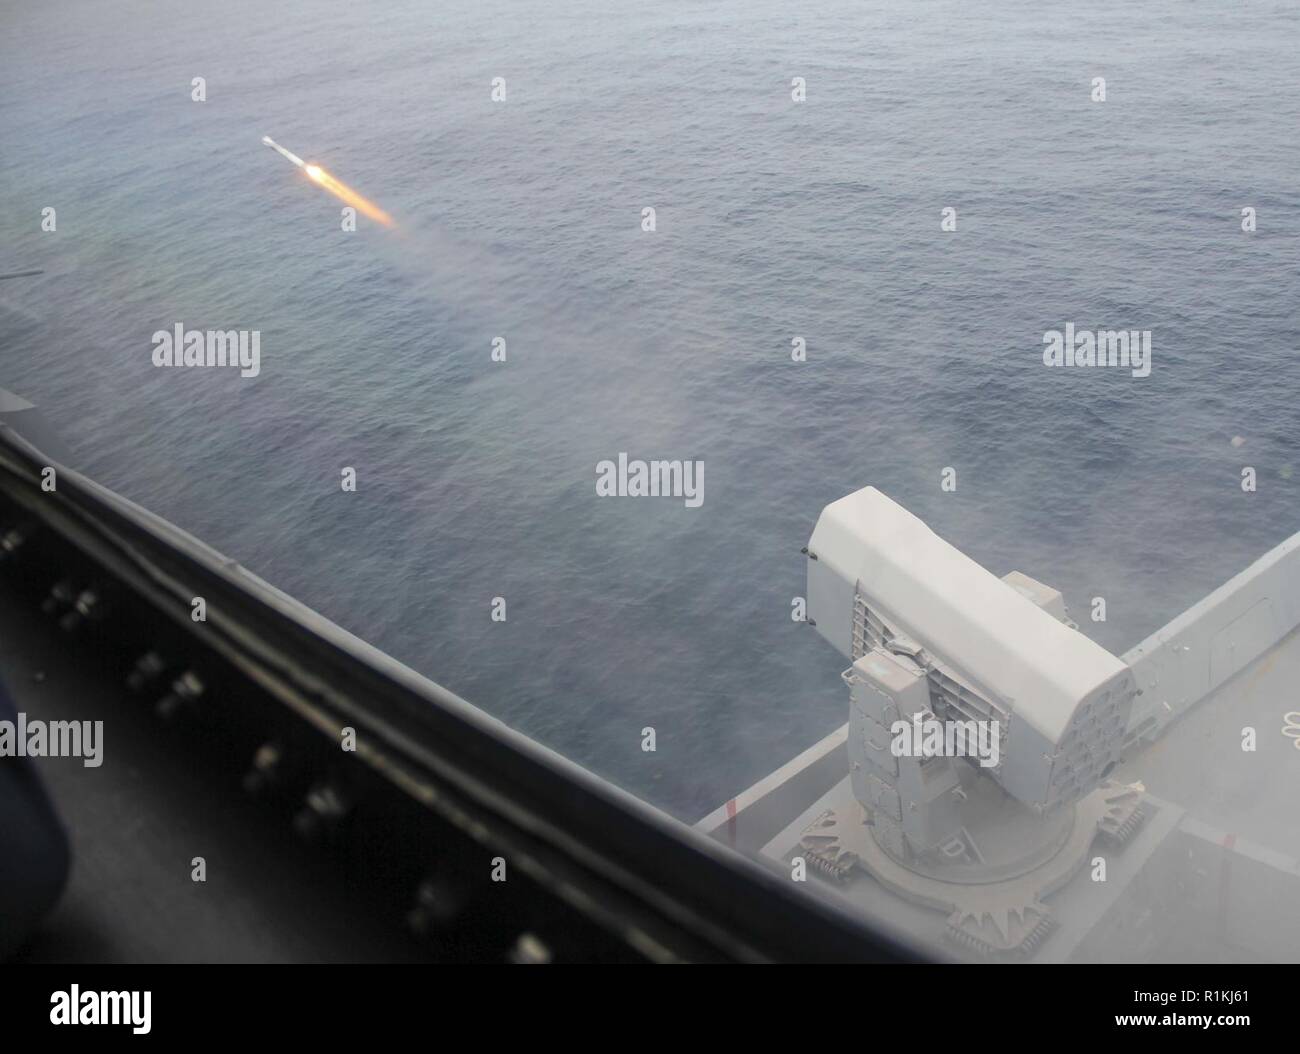 ATLANTIC OCEAN (Oct. 14, 2018) Amphibious transport dock ship USS Arlington (LPD 24) fires a rolling airframe missile (RAM) during a live fire missile exercise for the Carrier Strike Group (CSG) 4 composite training unit exercise (COMPTUEX). COMPTUEX is the final pre-deployment exercise that certifies the combined Kearsarge Amphibious Ready Group (ARG) and the 22nd Marine Expeditionary Unit’s (MEU) planning and execution of challenging and realistic training scenarios. CSG 4 mentors, trains and assesses East Coast units preparing for future deployments. Stock Photo